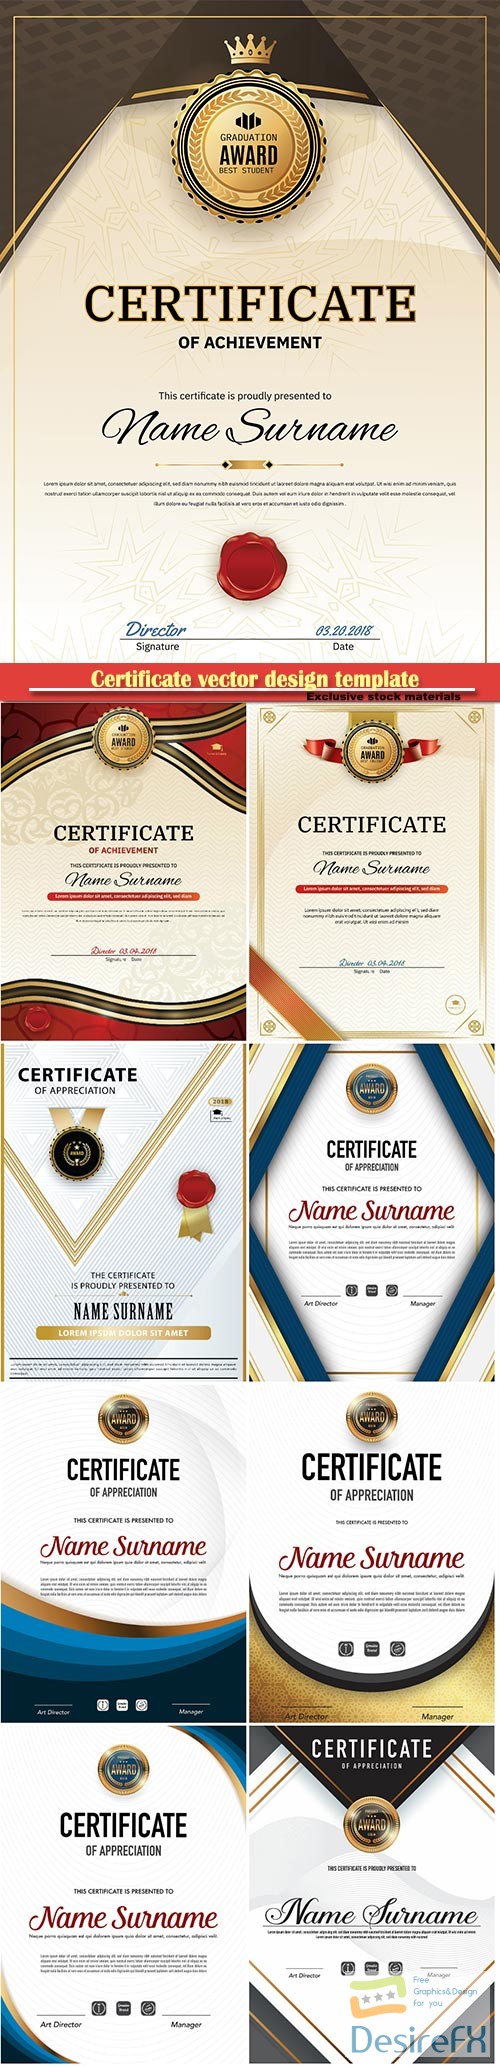 Certificate and vector diploma design template # 66